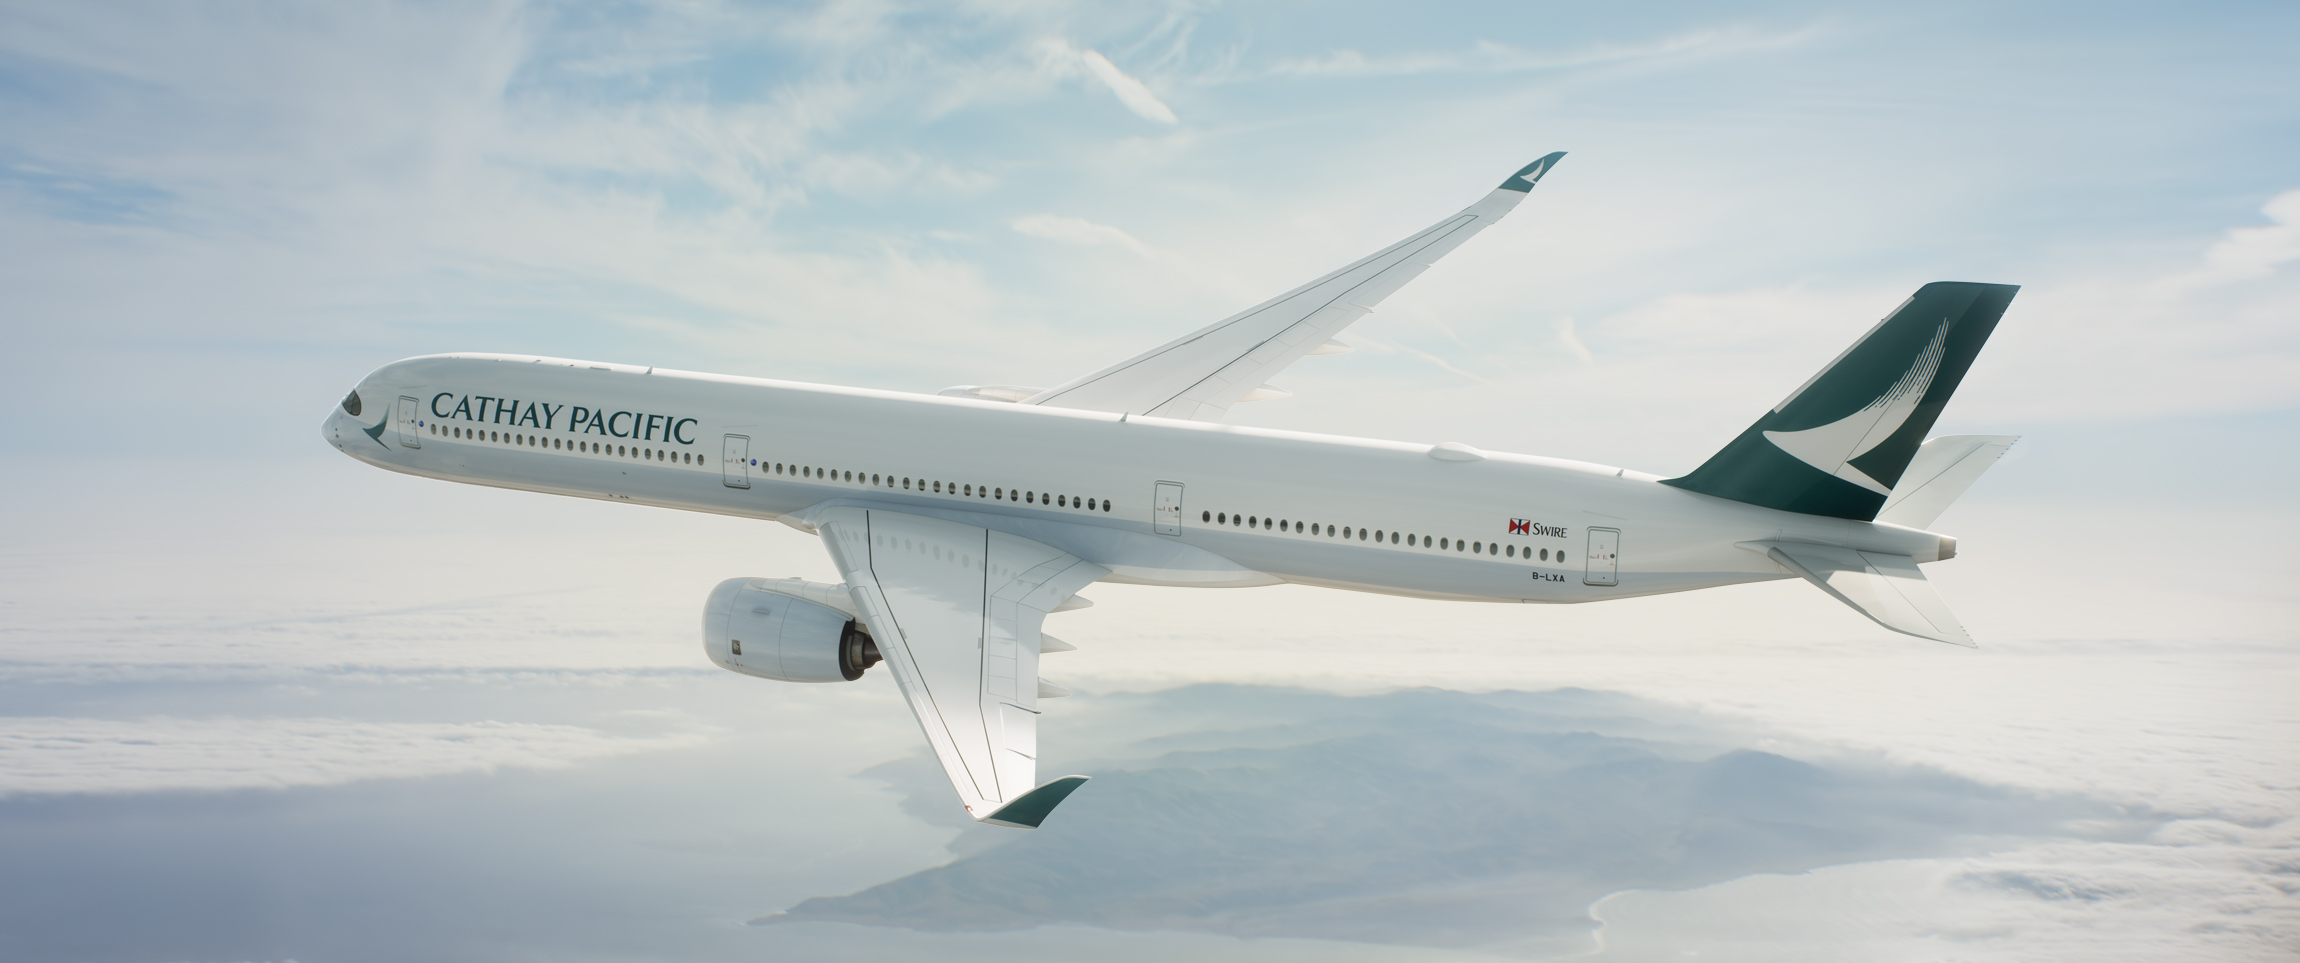 Cathay Pacific Banner